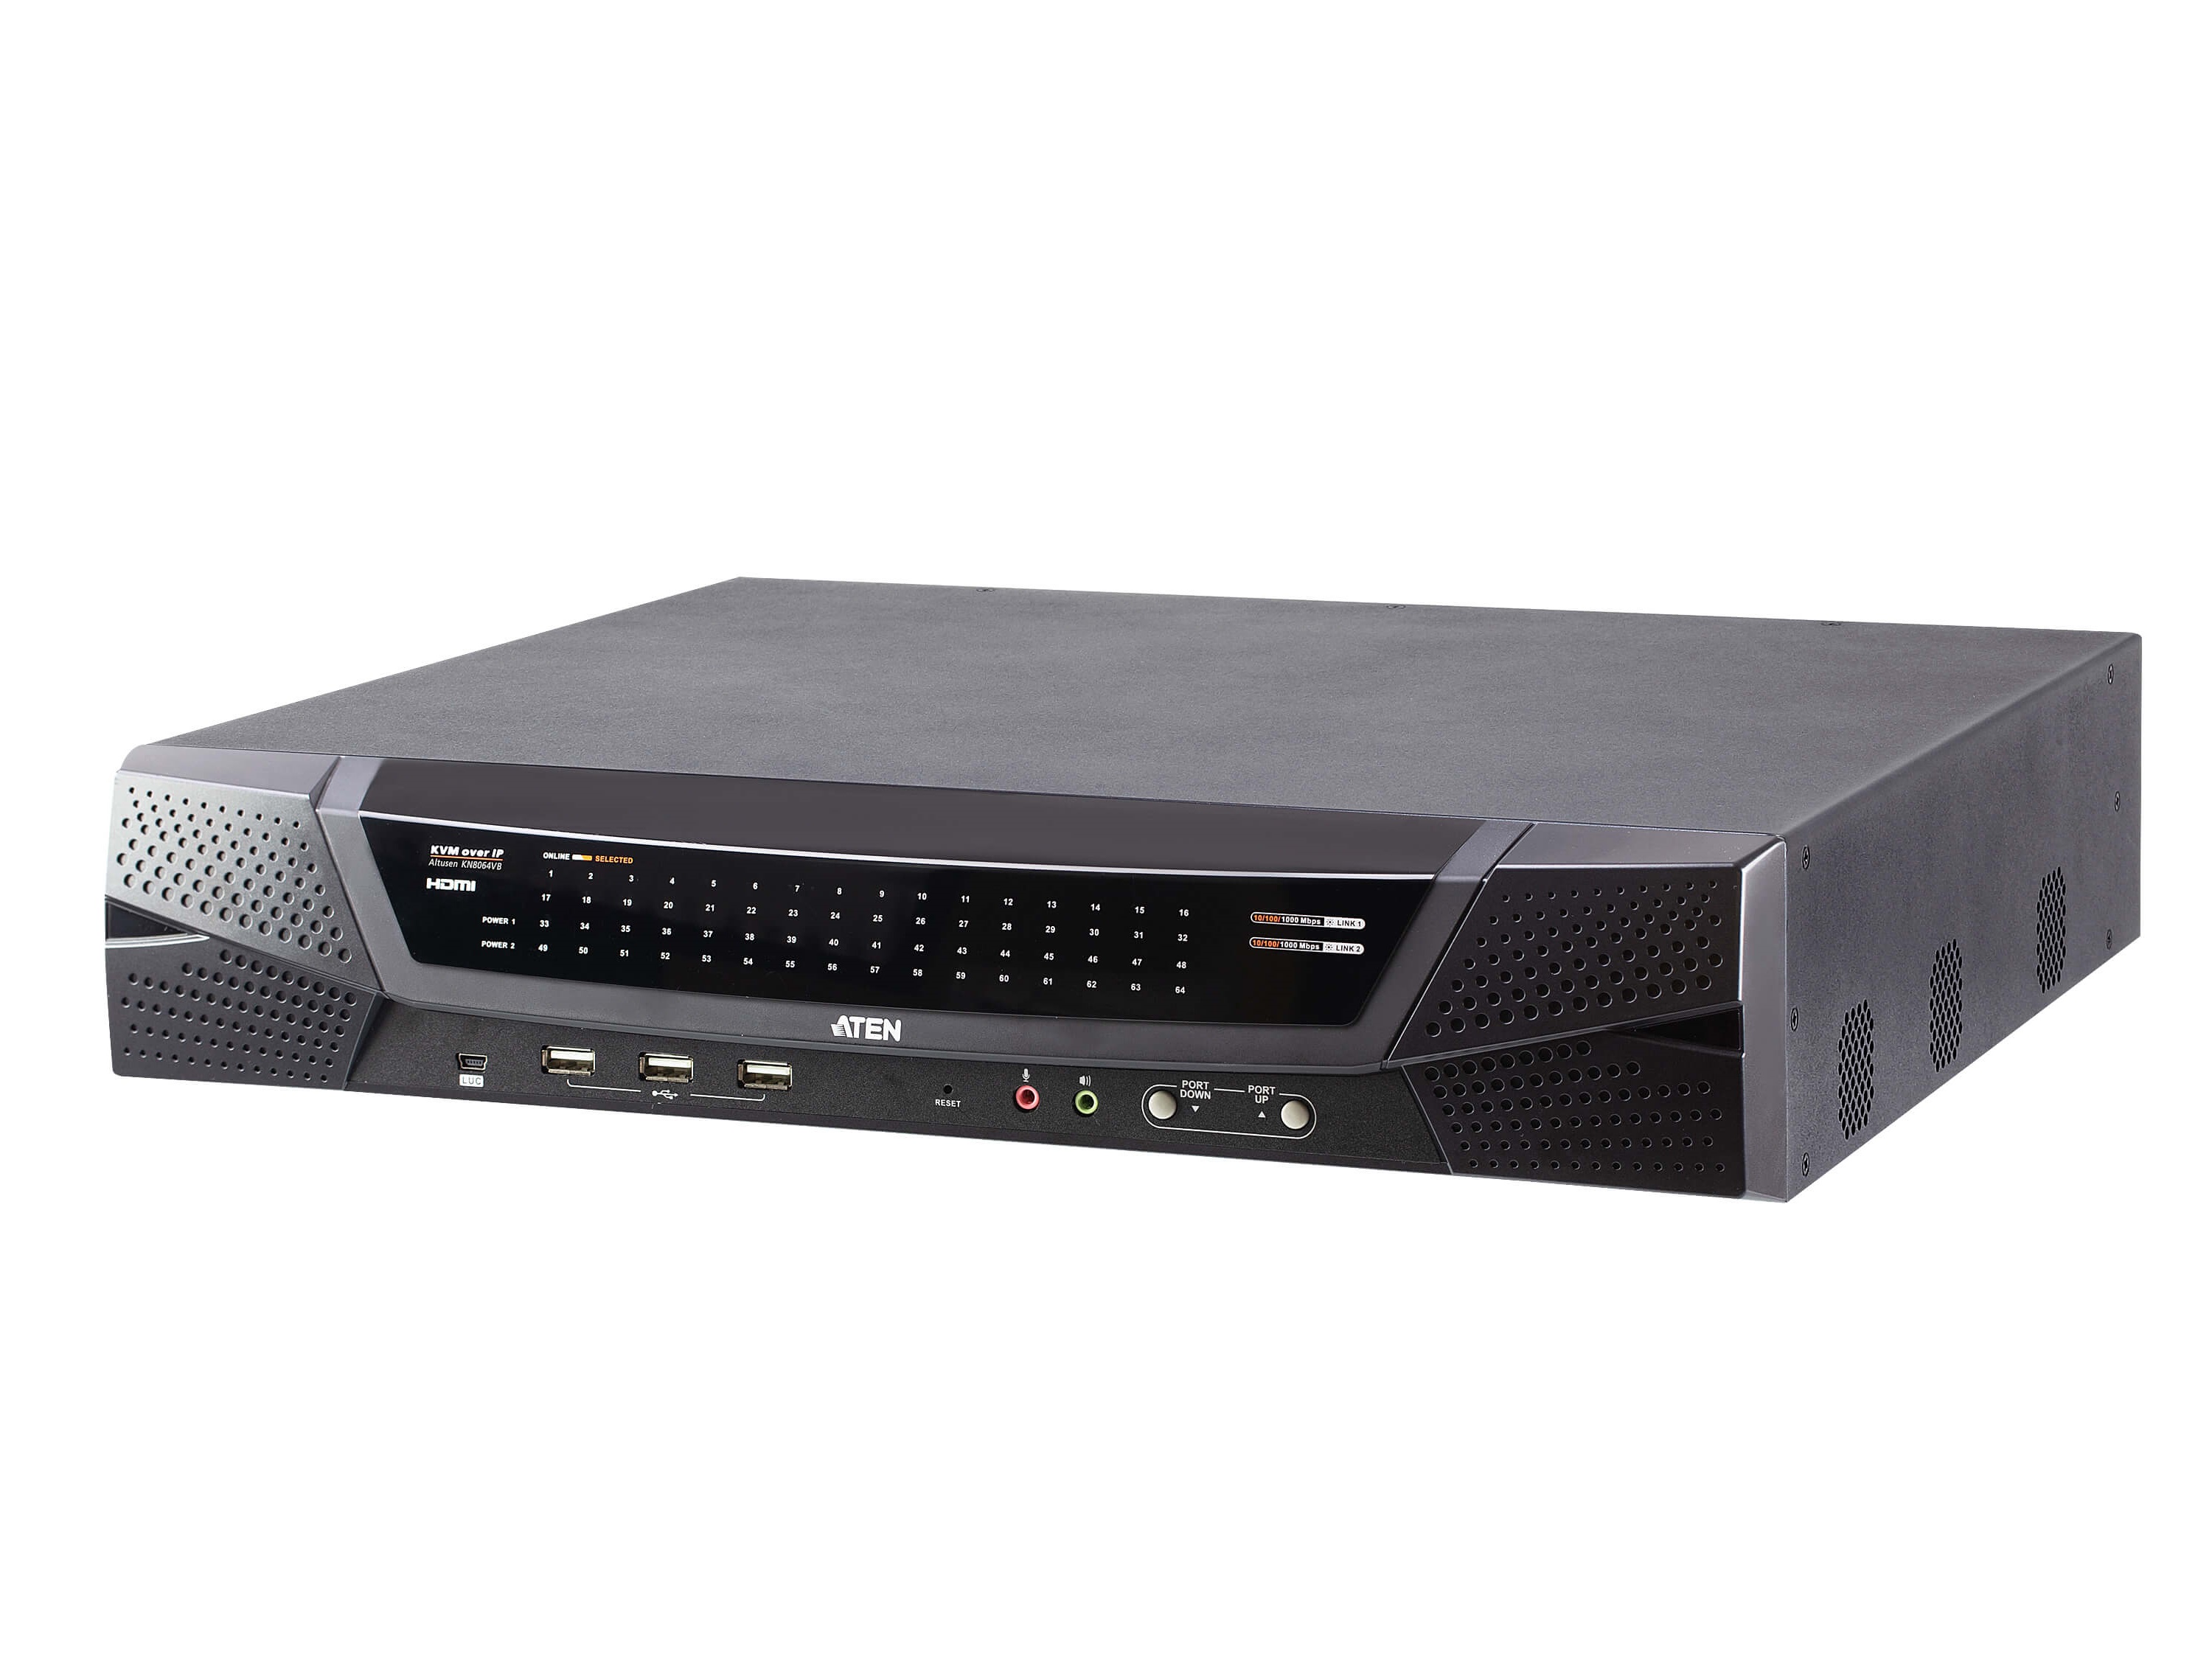 KN8064VB 1-Local/8-Remote Shared Access 64-Port Multi-Interface Cat 5 KVM over IP Switch by Aten